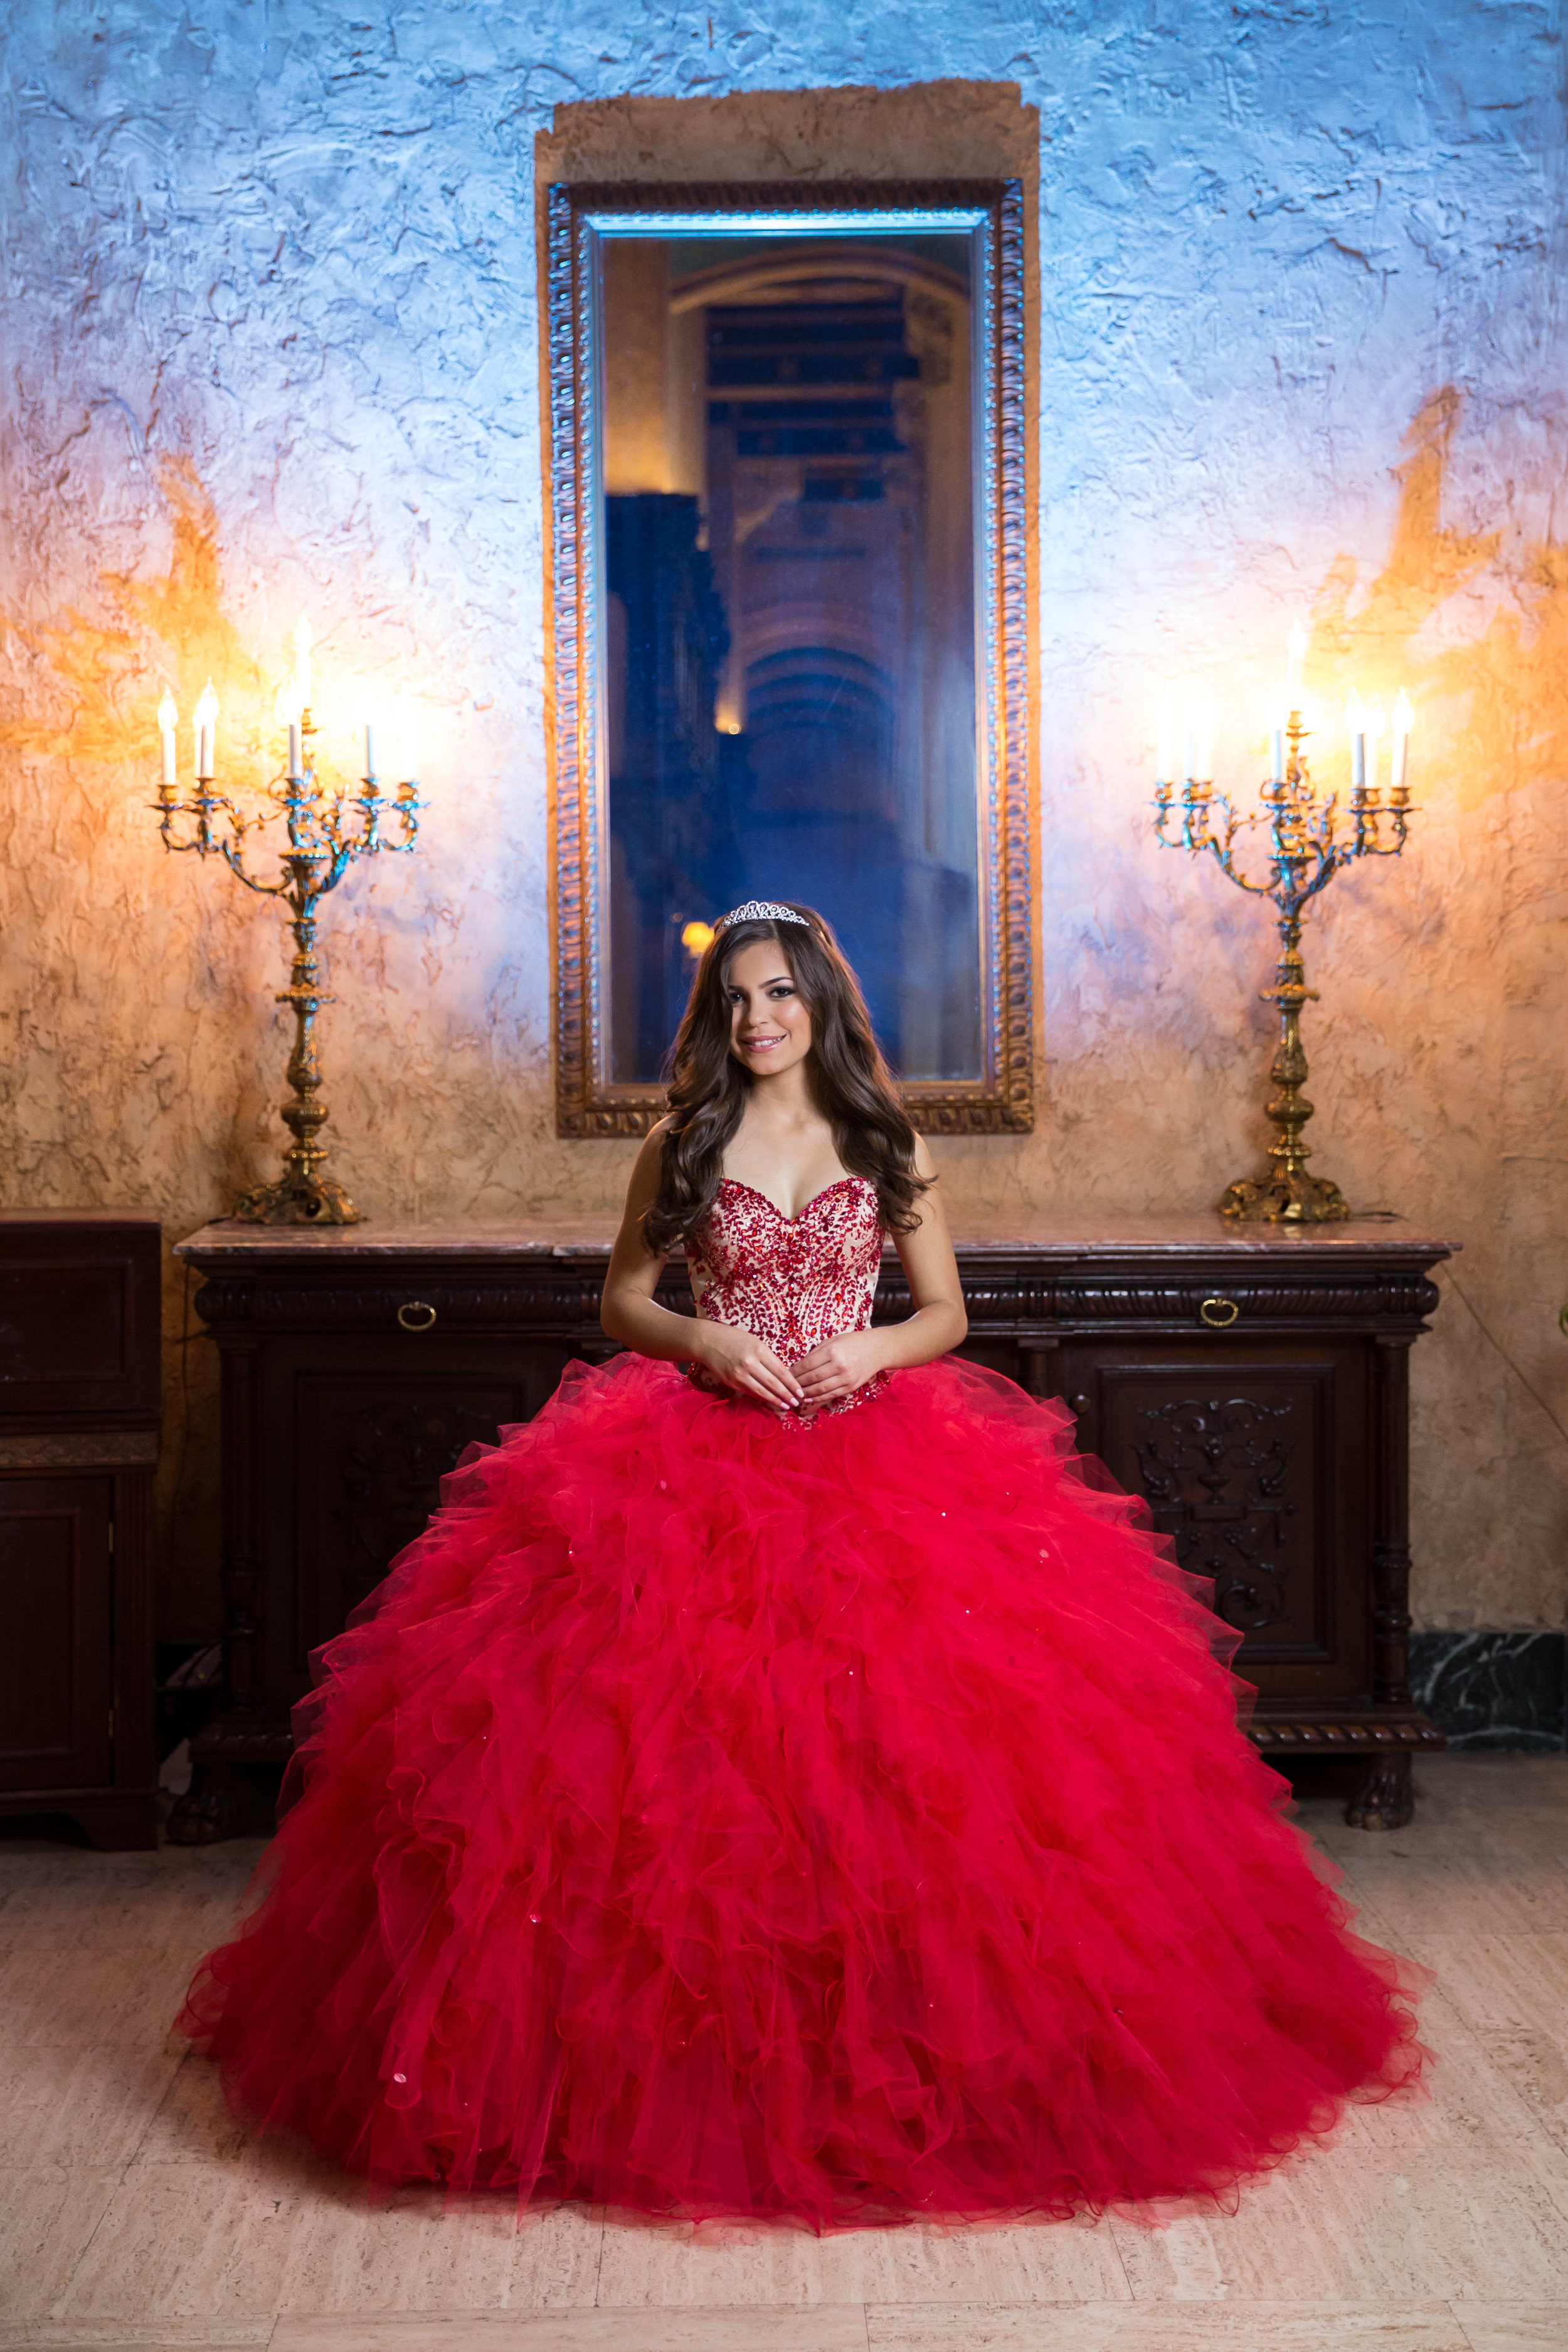 Quince Portraits | The Biltmore Hotel